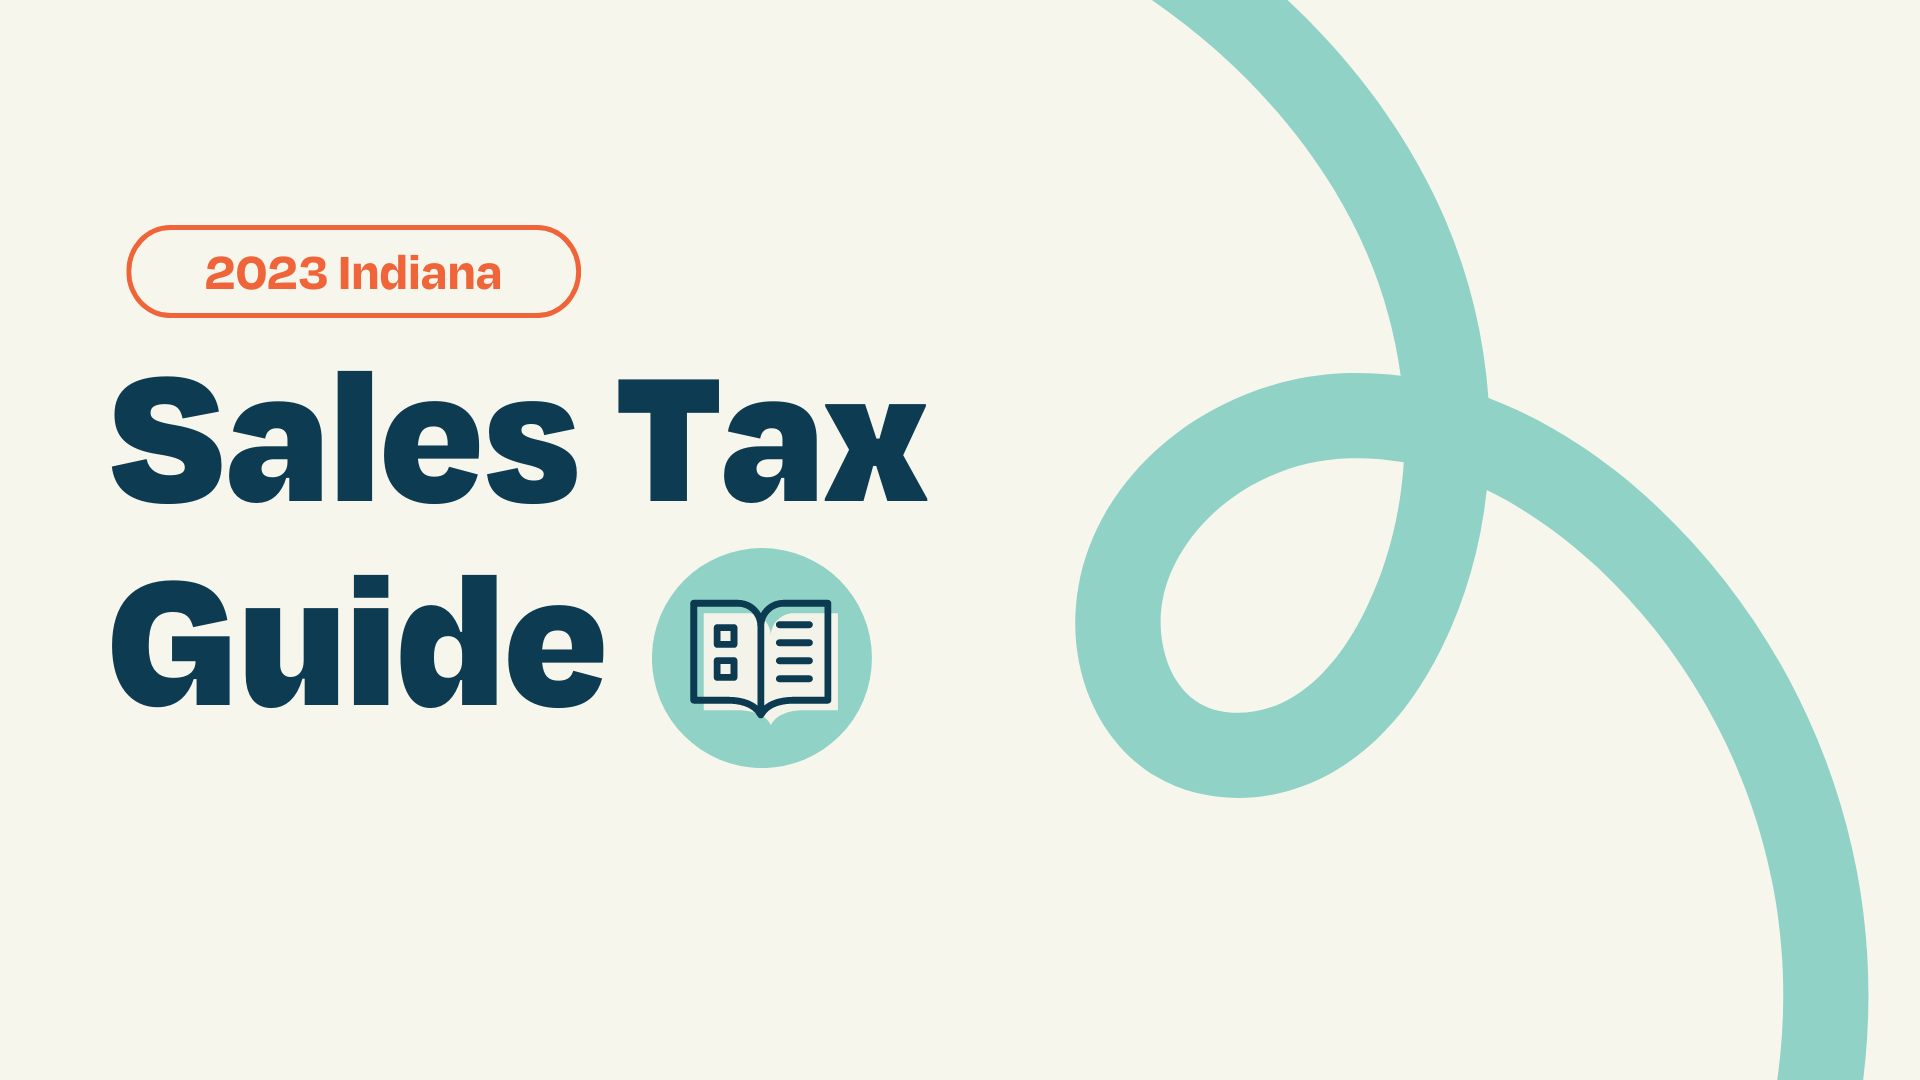 Indiana 2023 Sales Tax Guide